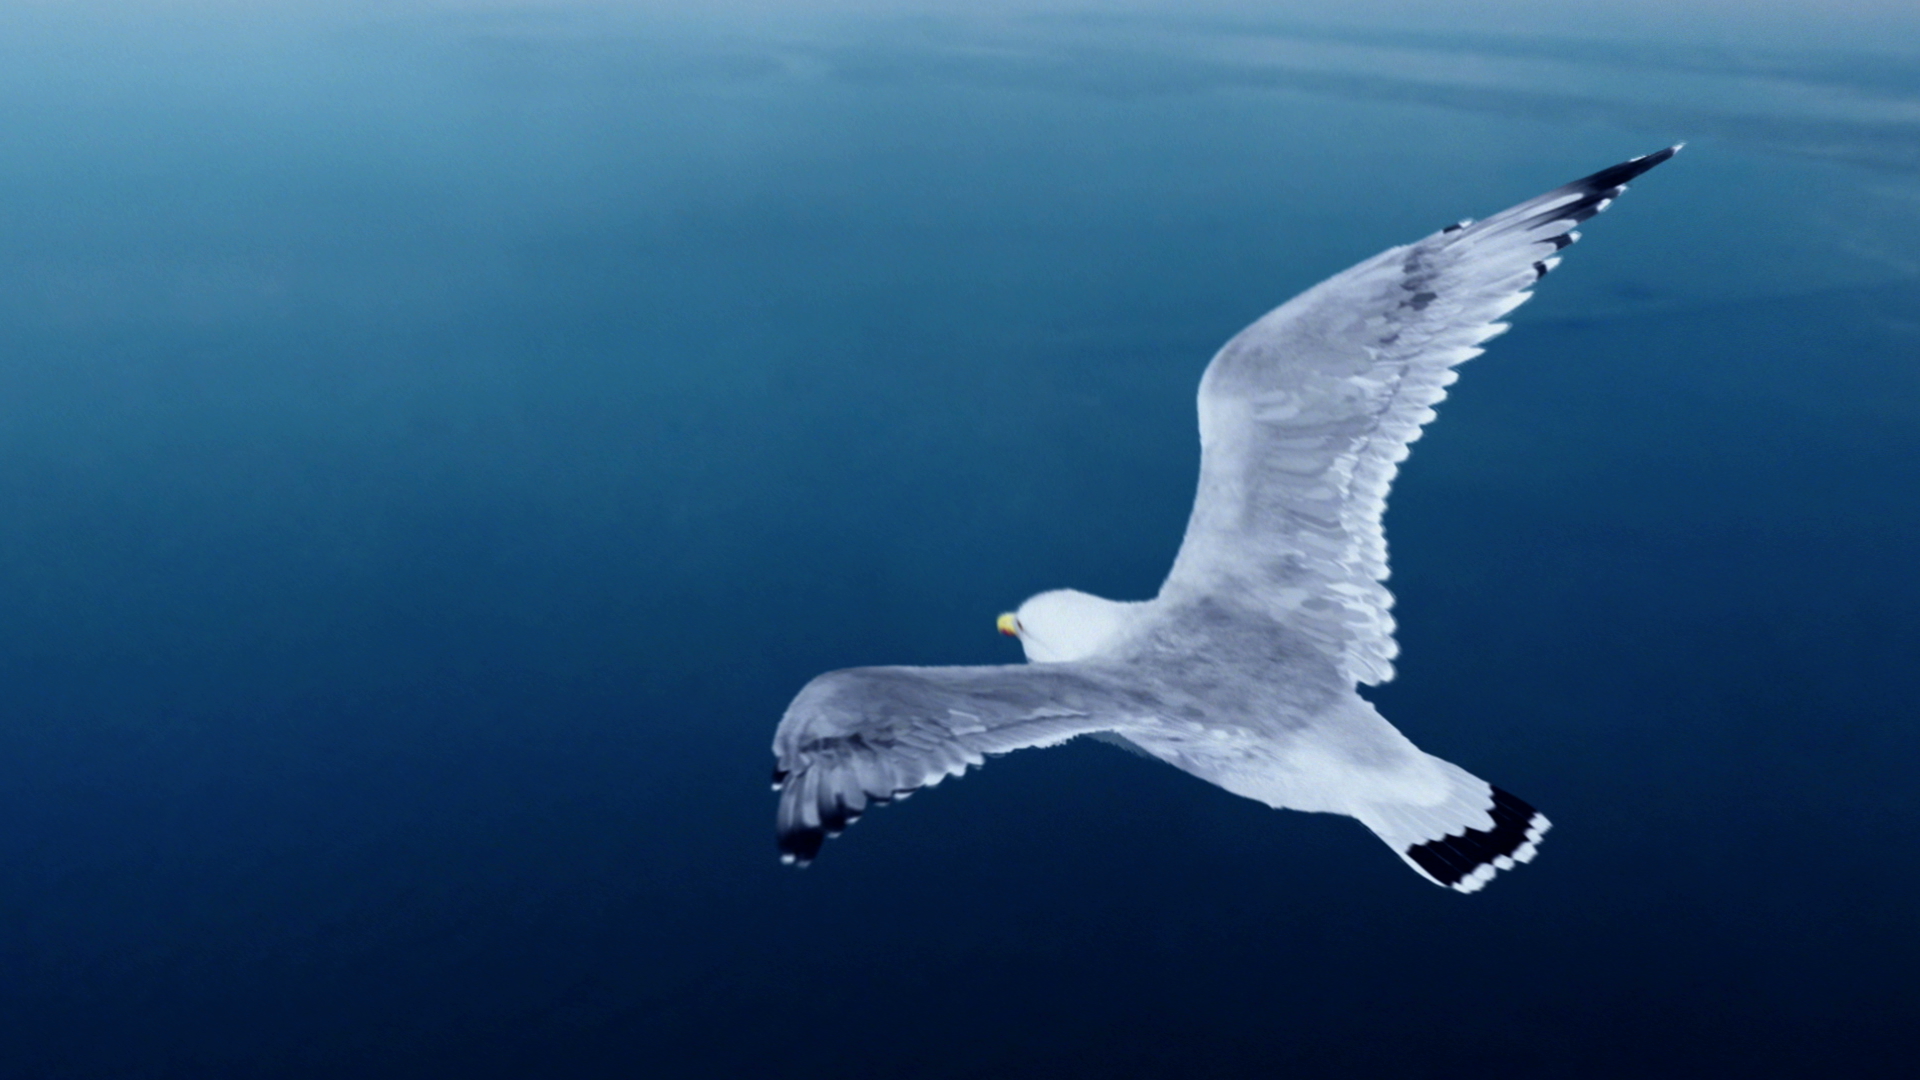 Matt the seagull flies high with the new campaign created by InTesta – Armando Testa Group